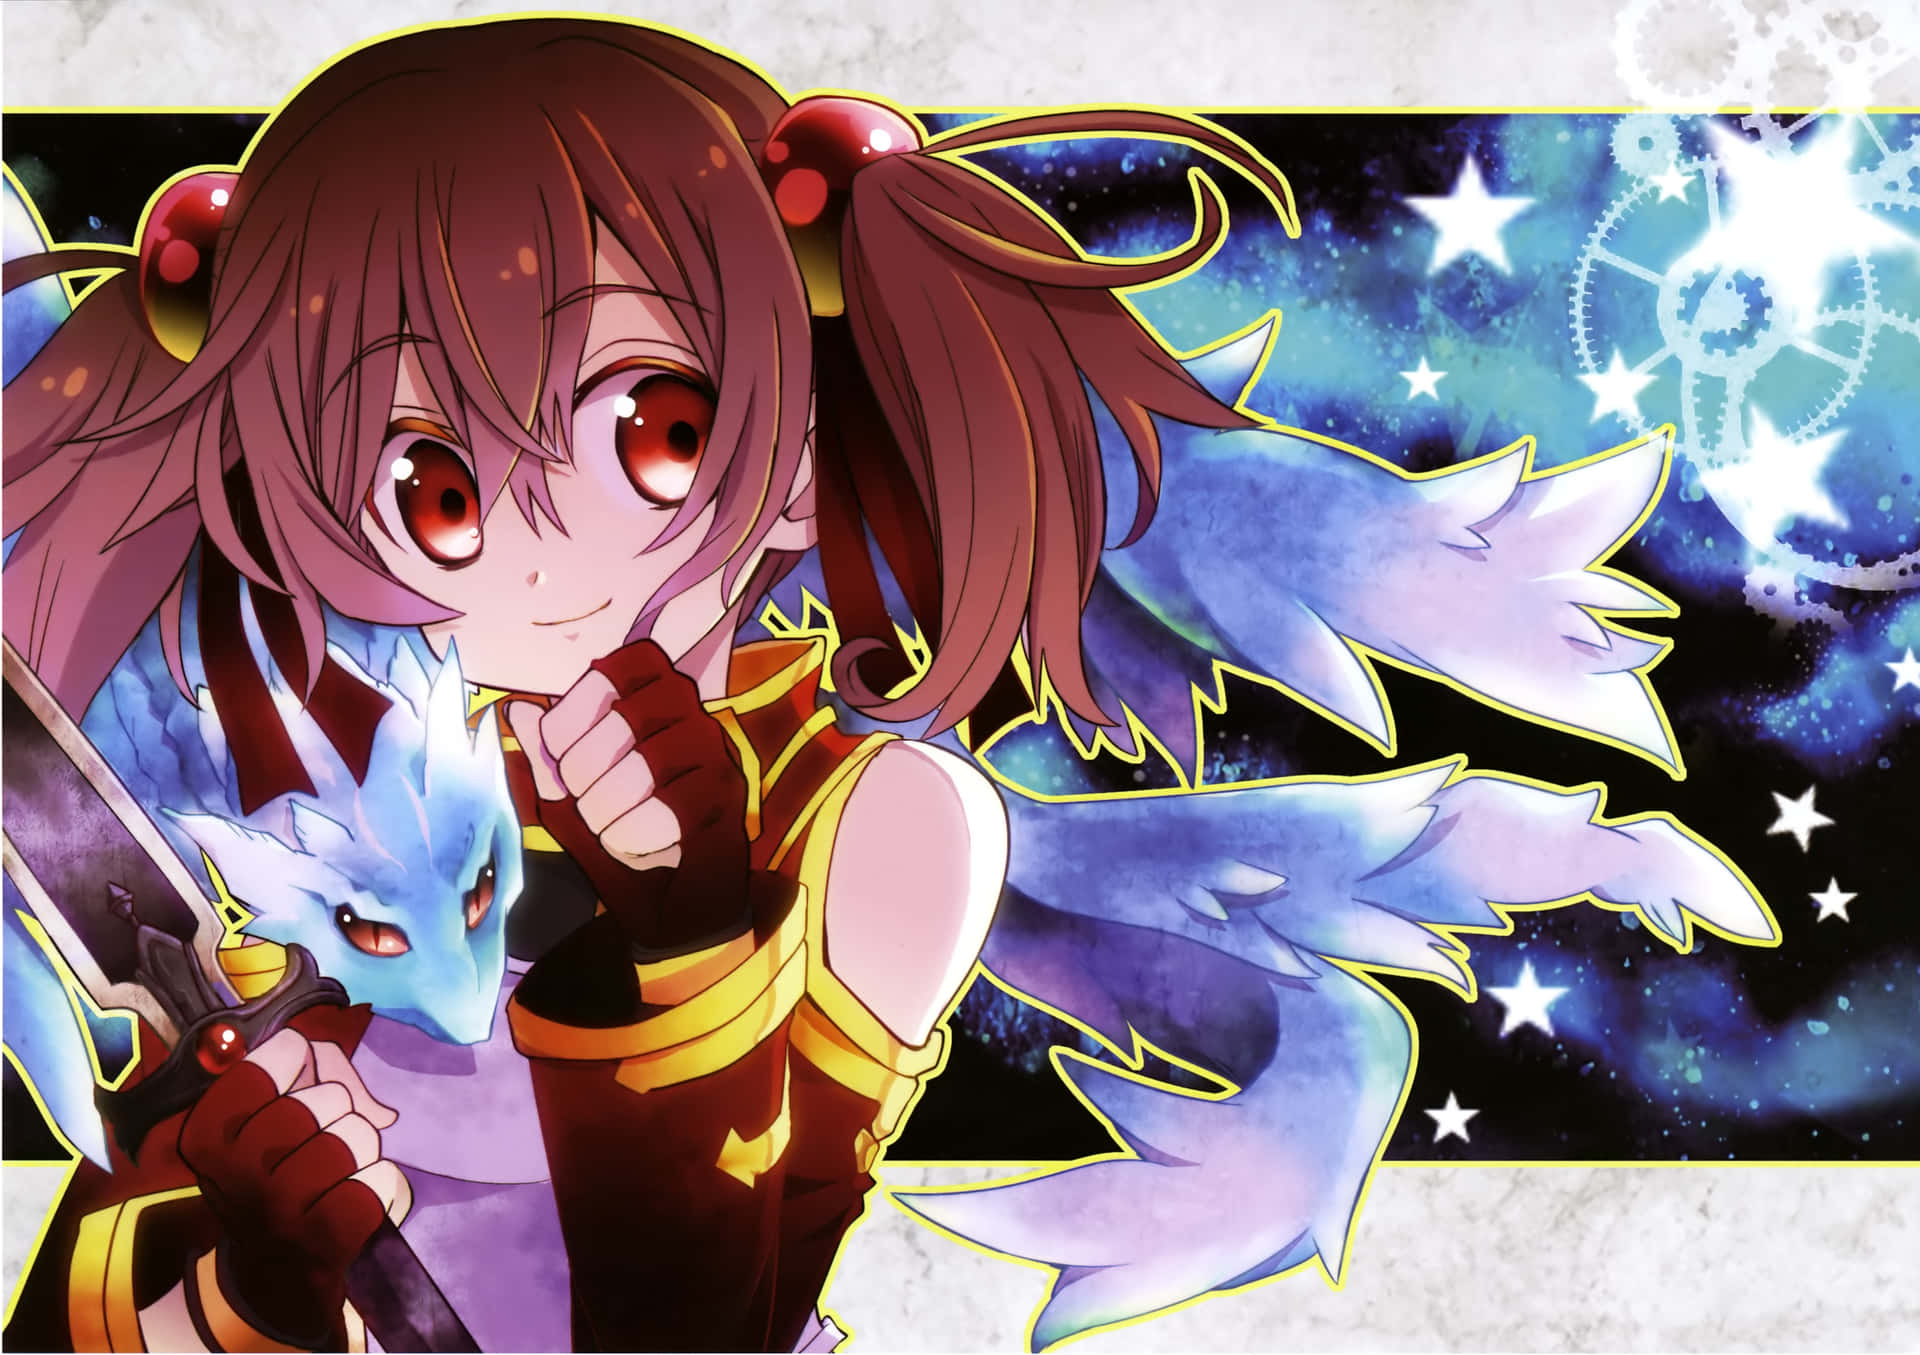 Silica from Sword Art Online with her familiar Pina Wallpaper